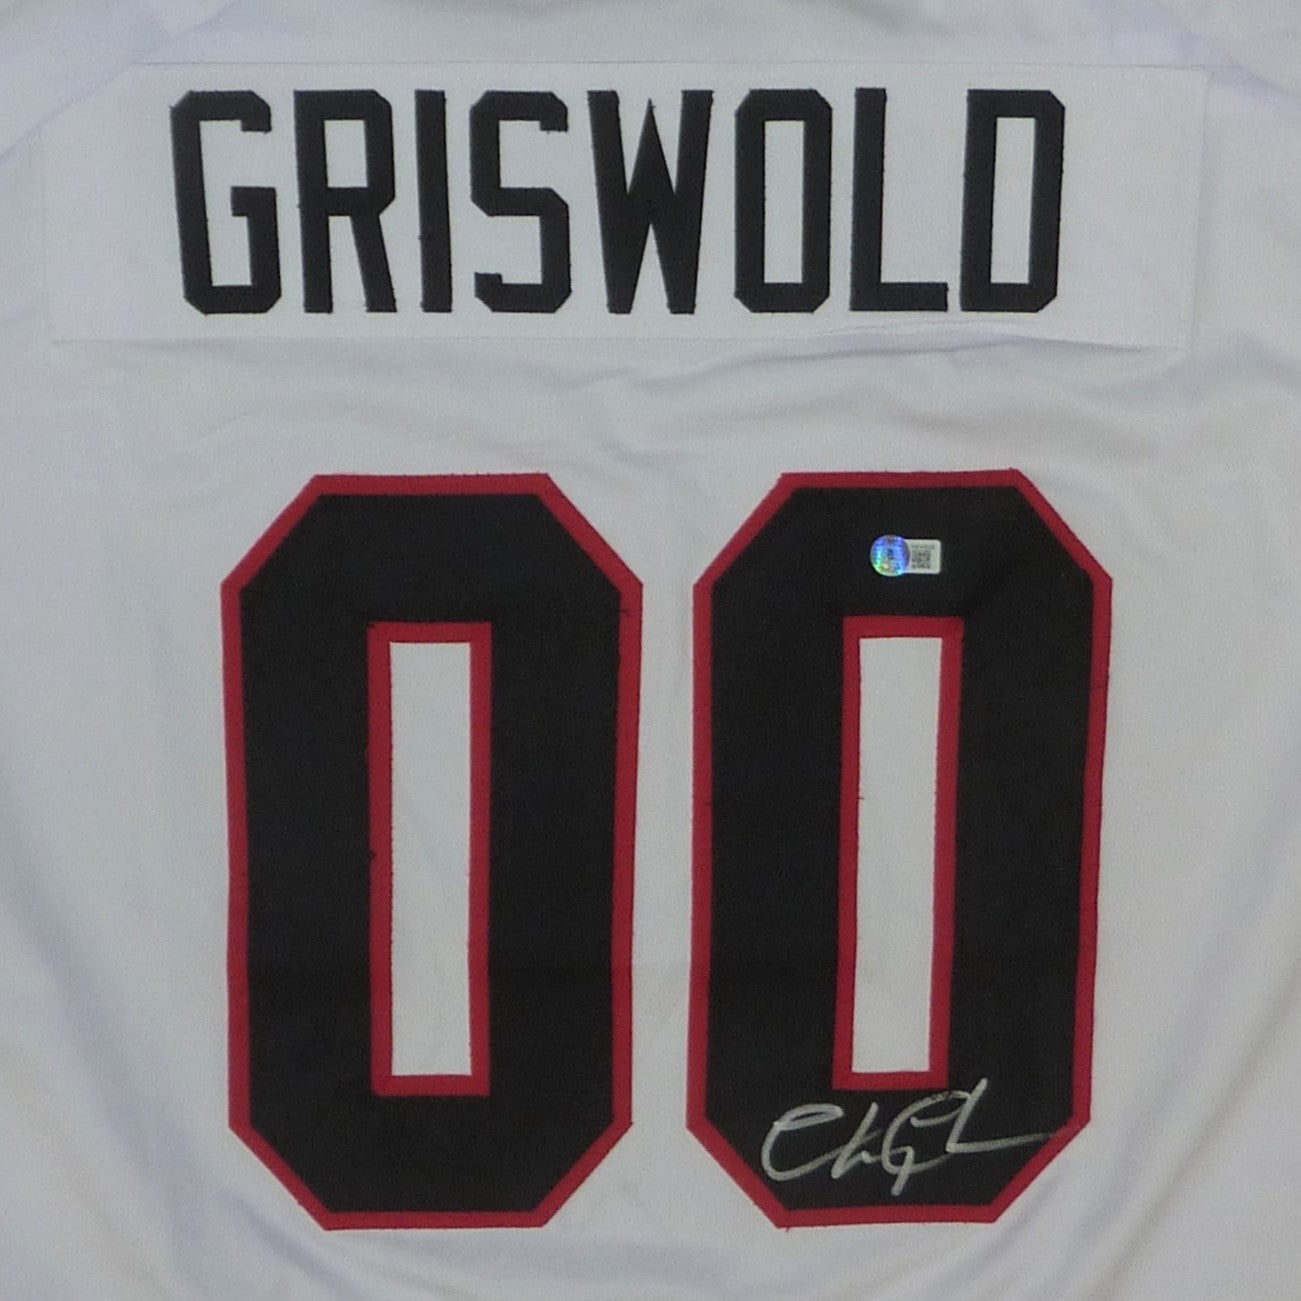 Ice Hockey Jersey Griswold, Griswold Christmas Hockey